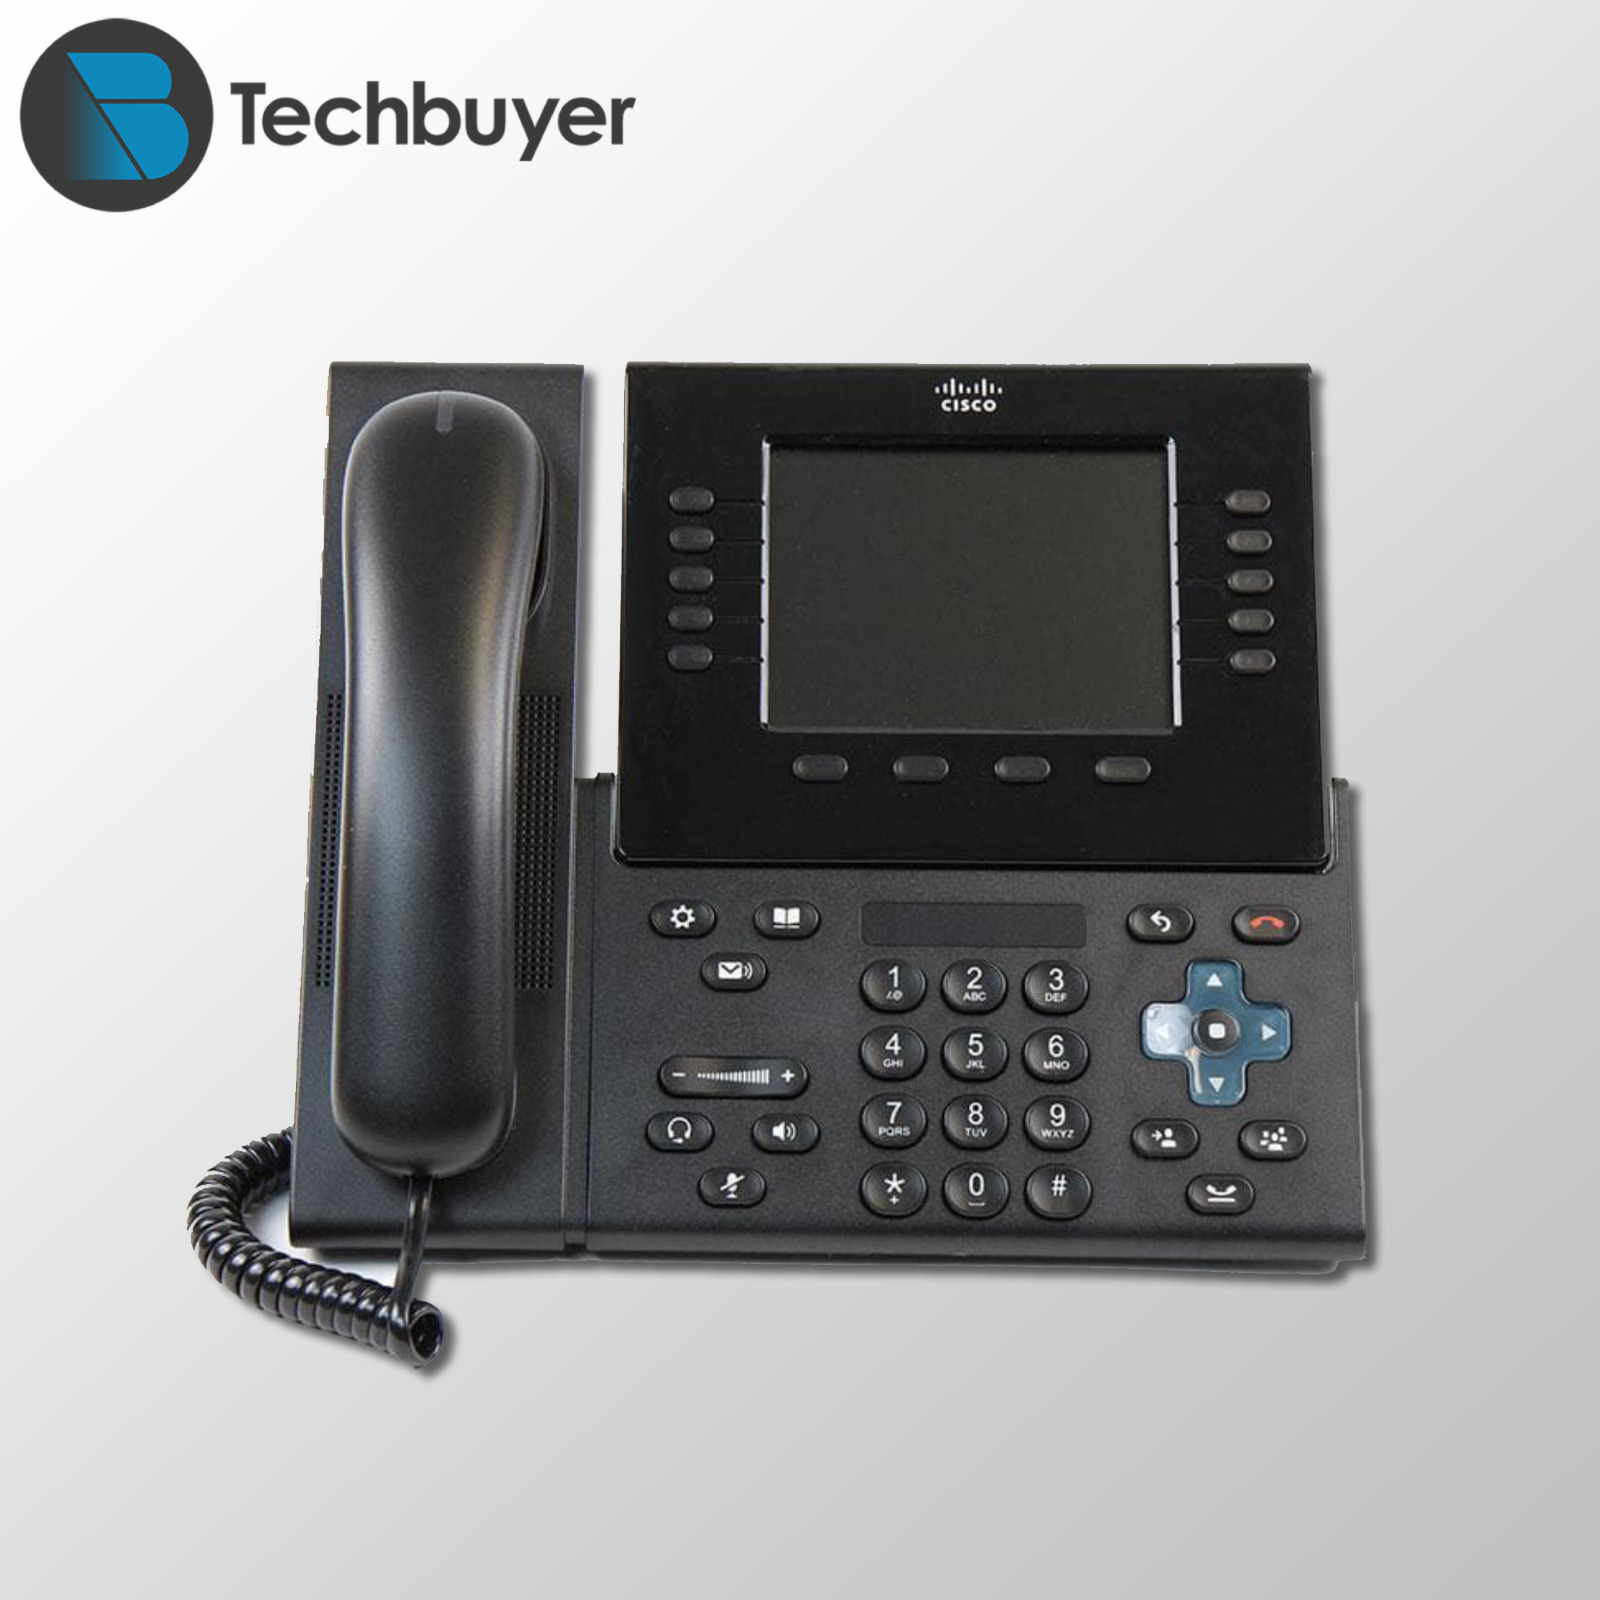 CISCO 8961 UNIFIED IP PHONE VOIP with Handset and stand | New Factory Sealed